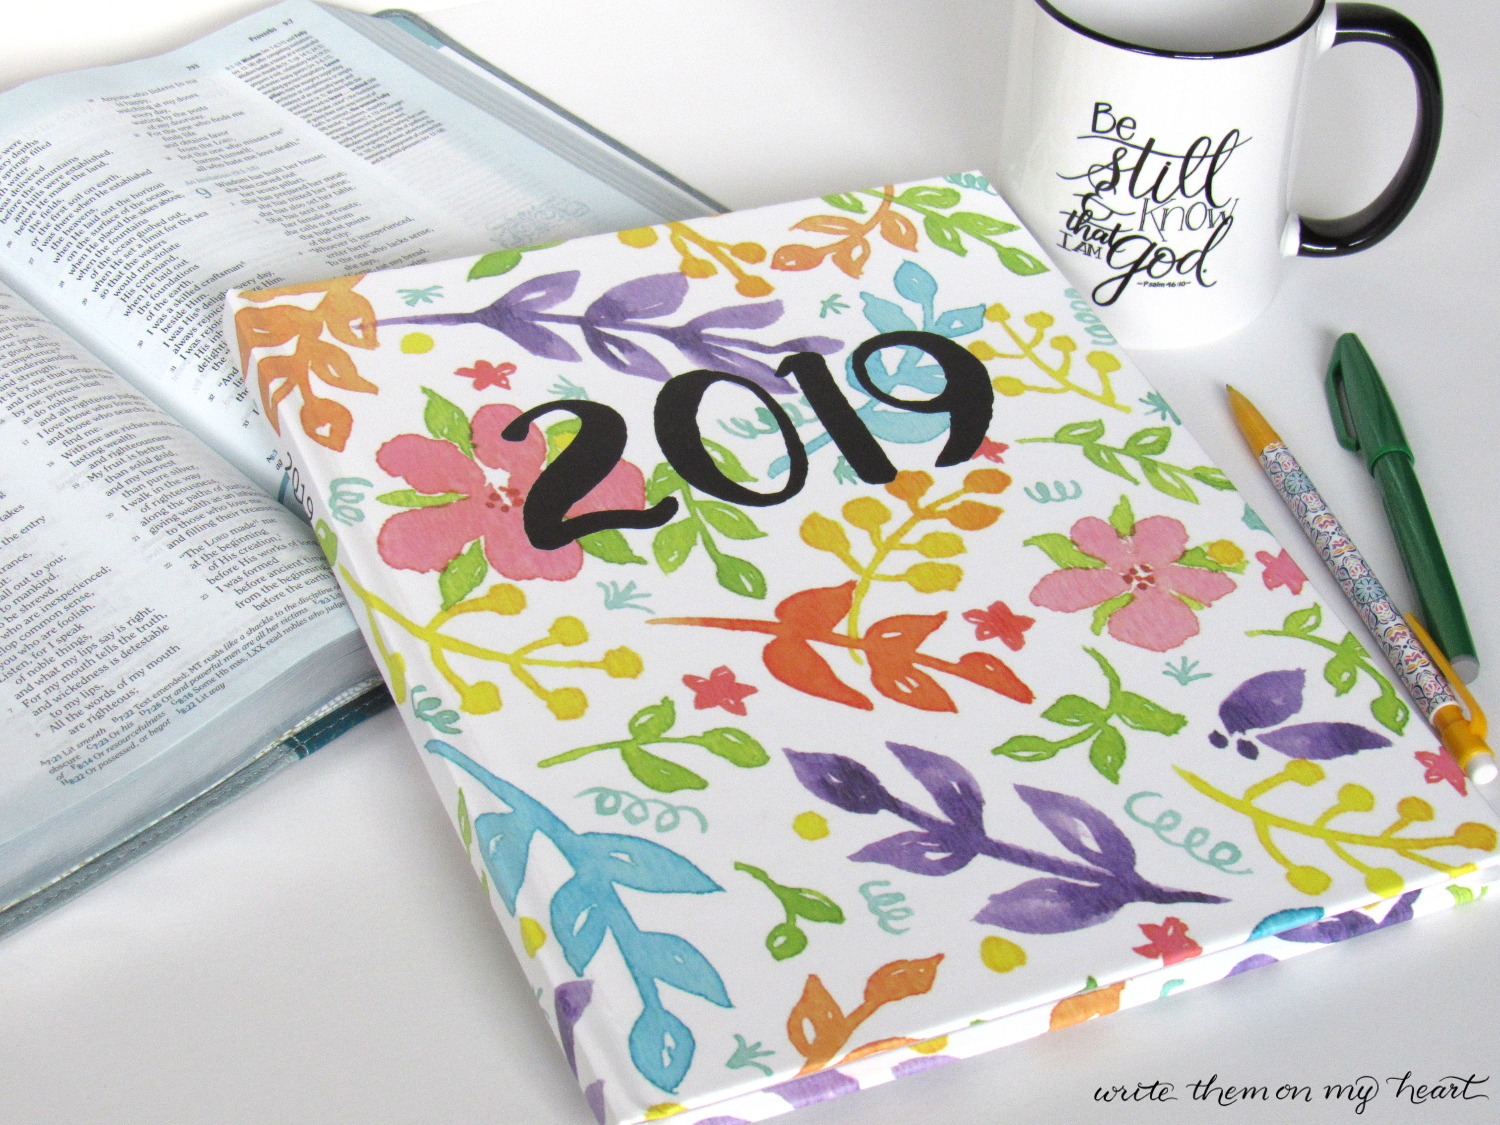 Ready to transform your Bible reading habit? Your whole life, even? If you want to write God's Word on your heart, but nothing you've tried has stuck, this Verse Journal is for you!